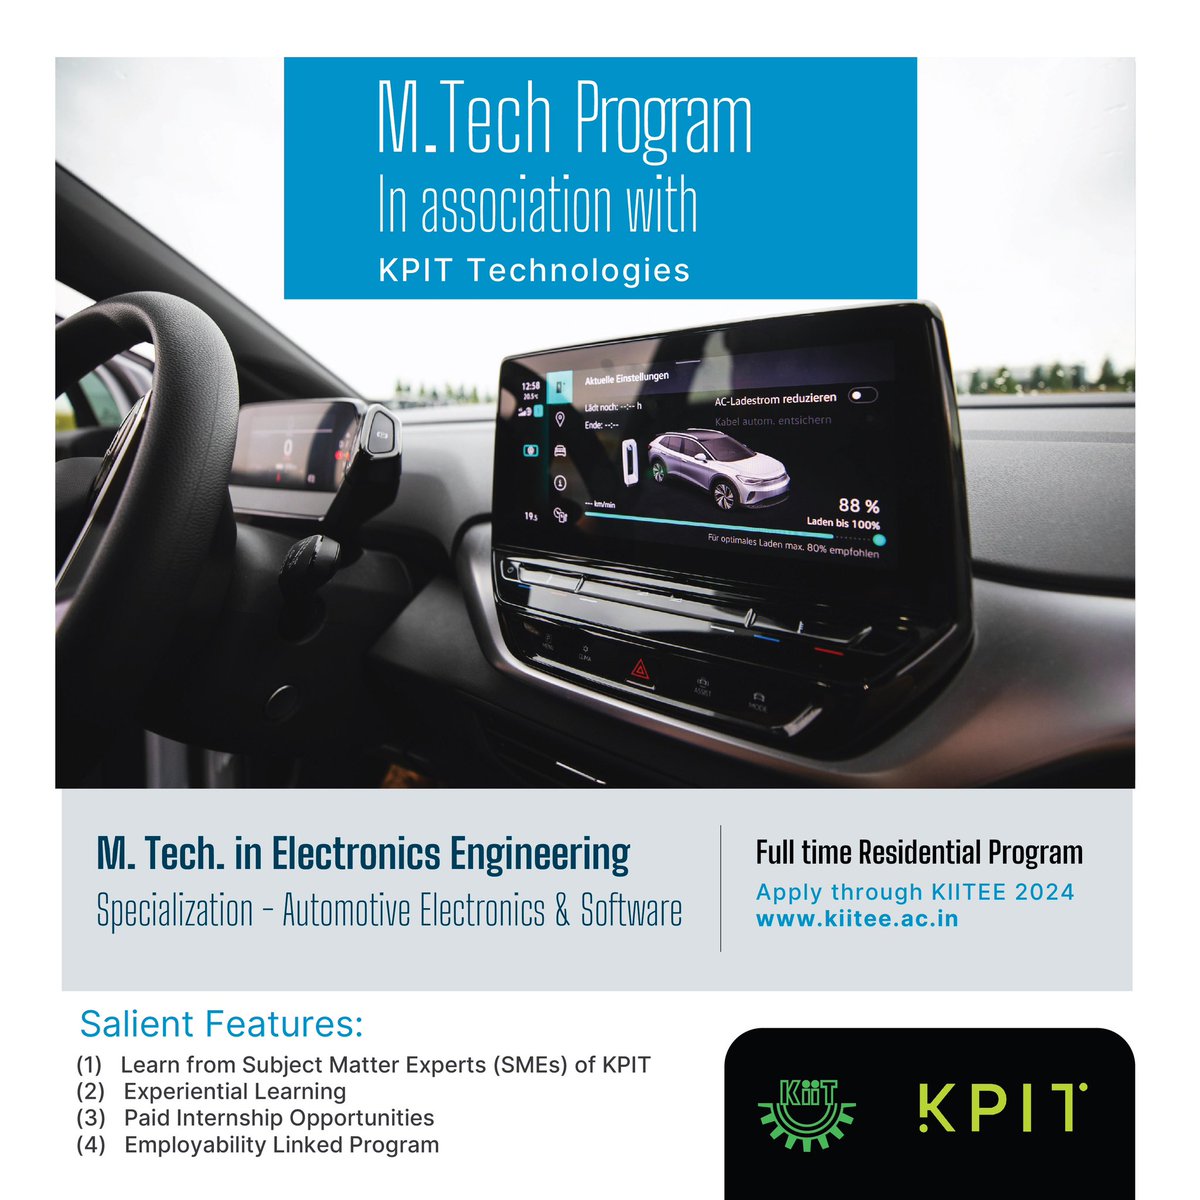 #KIIT School of Electronics Engineering has introduced a pioneering co-branded M.Tech program in partnership with KPIT Technologies. This program aims to revolutionize the mobility sector by creating innovative software technology solutions. Enrol now to be a